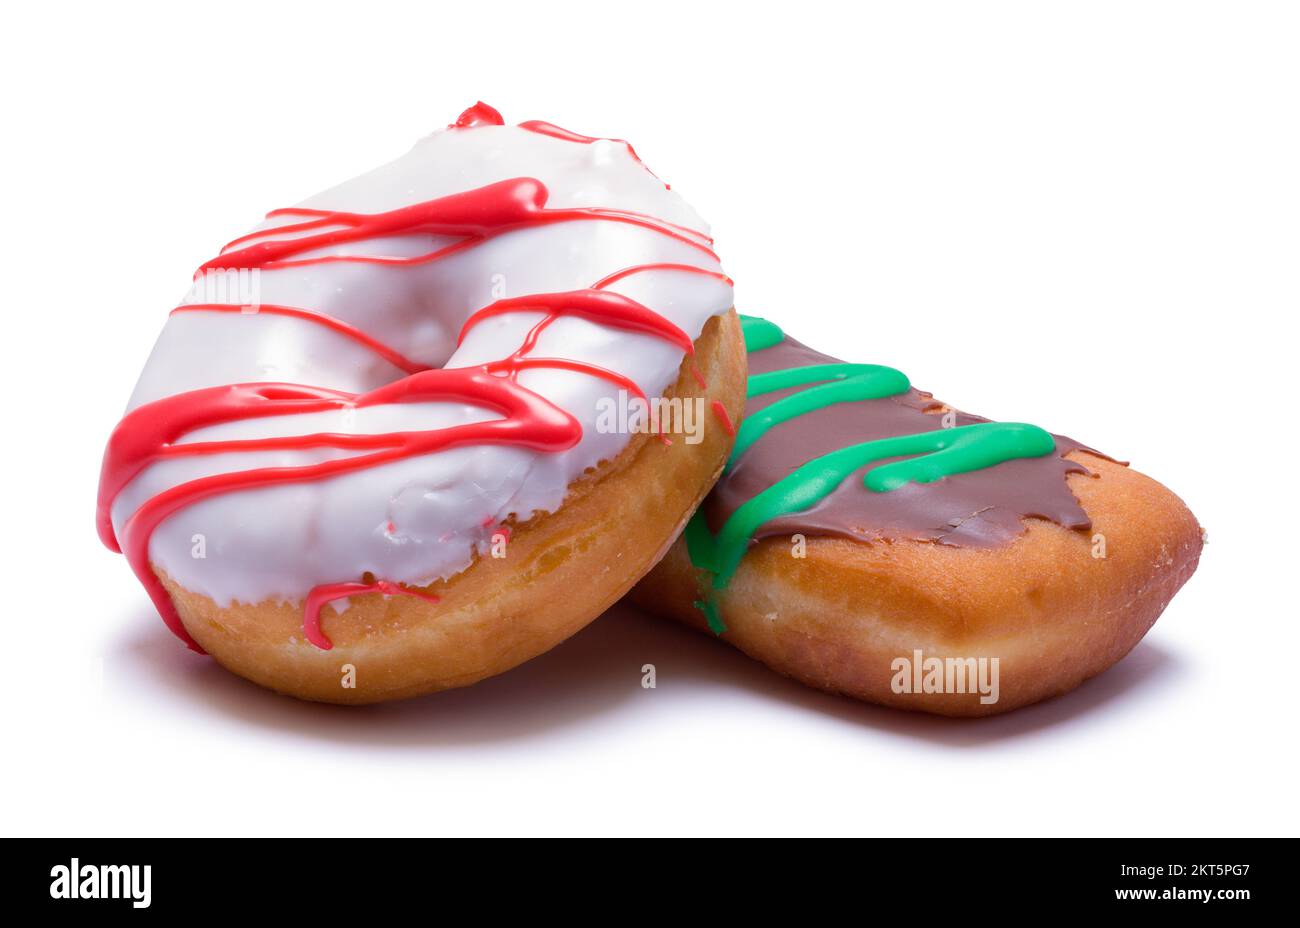 Two Baked Frosted Doughnuts Cut Out on White. Stock Photo